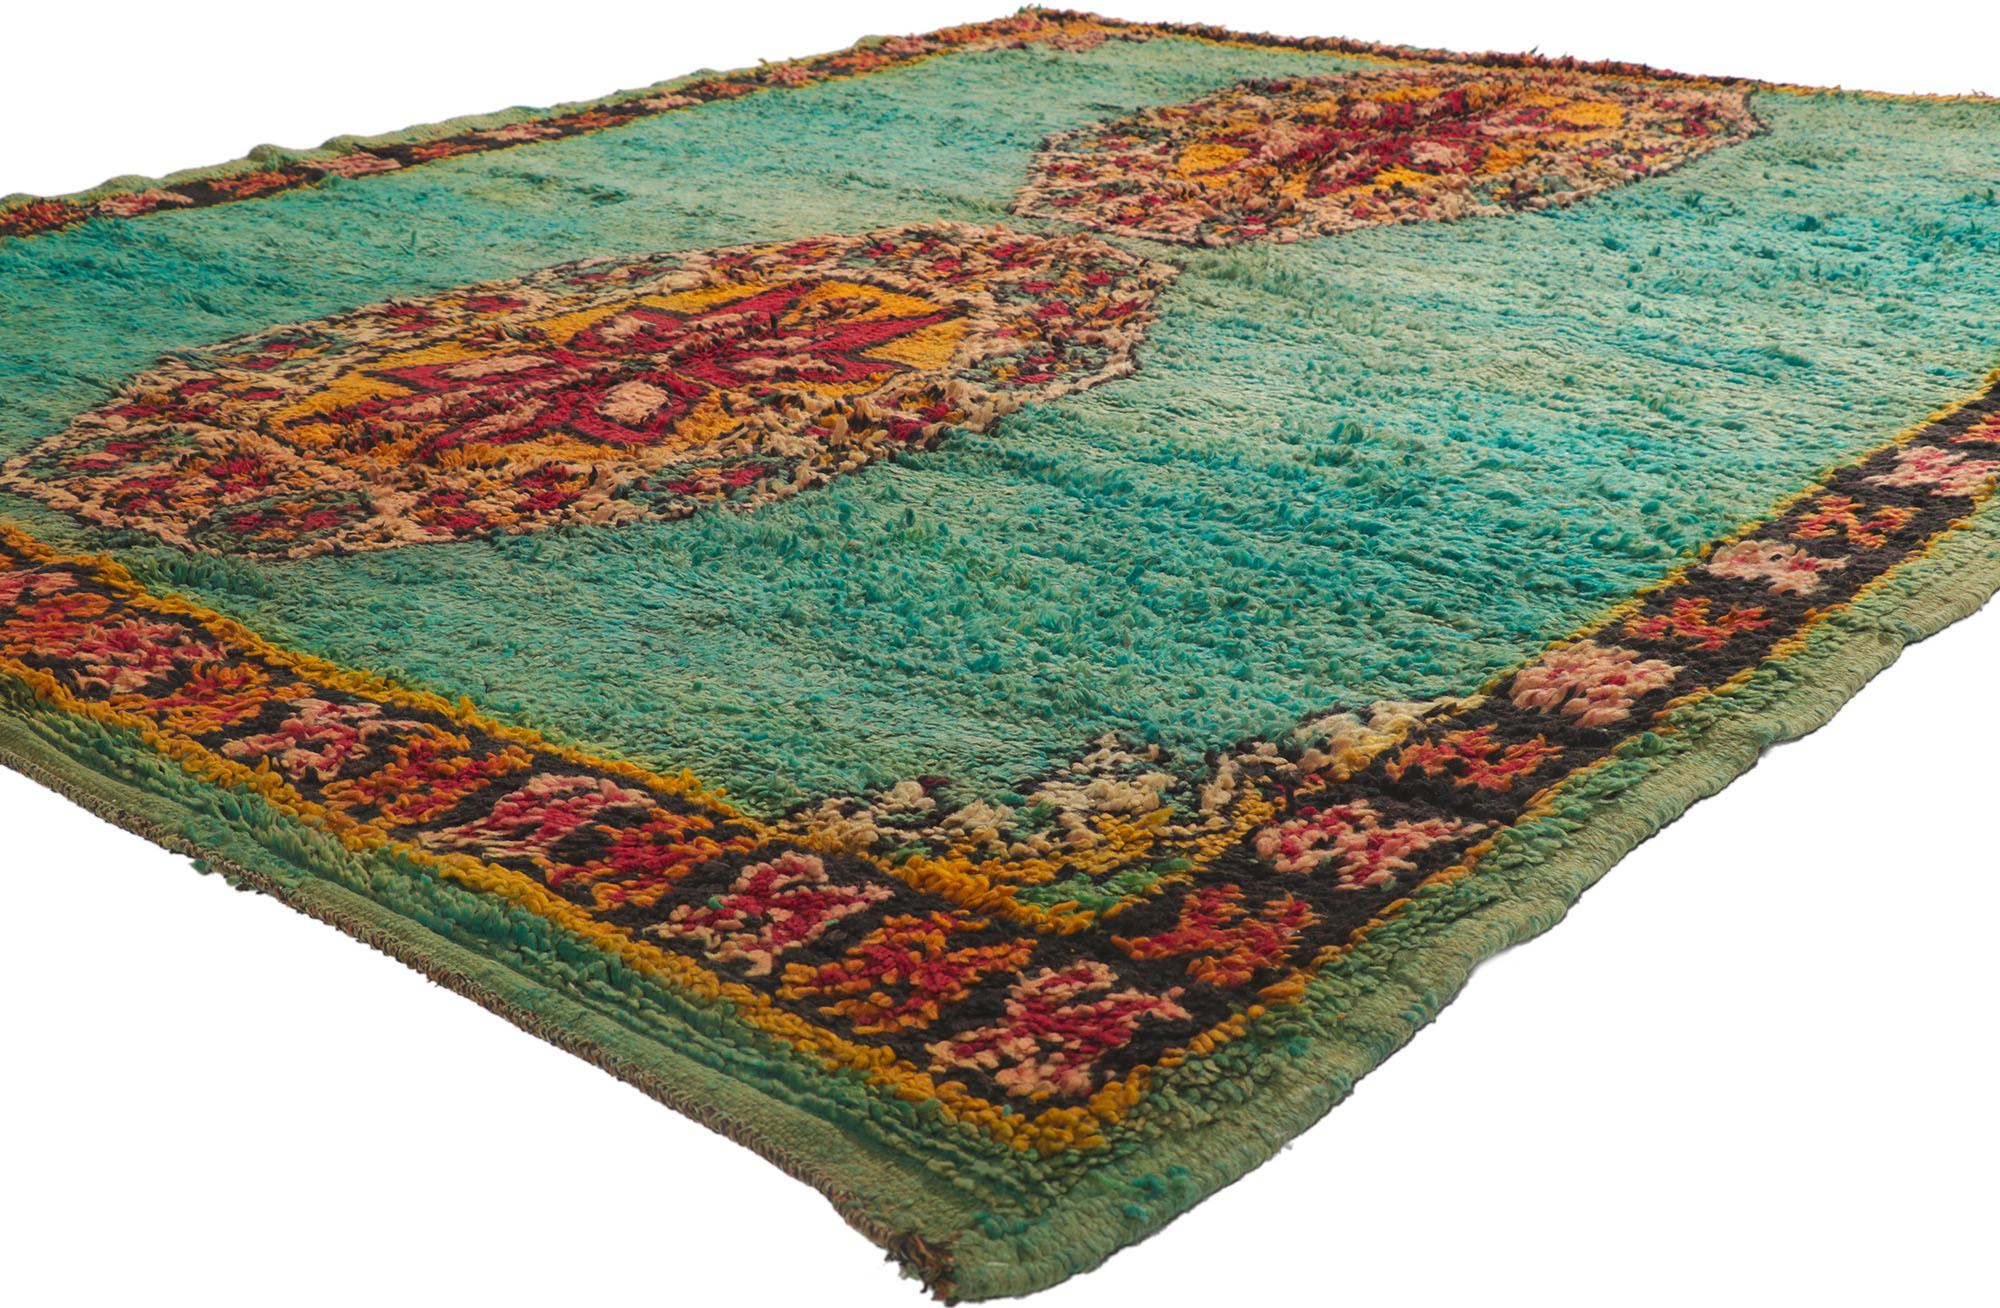 21261 Vintage Berber Moroccan Rug, 06'08 x 08'06. Rendered in variegated shades of f aqua, red, orange, teal, amber, ruby red, turquoise, peach, verdigris, ochre, charcoal, and raspberry red with other accent colors. 
Berber Tribes of